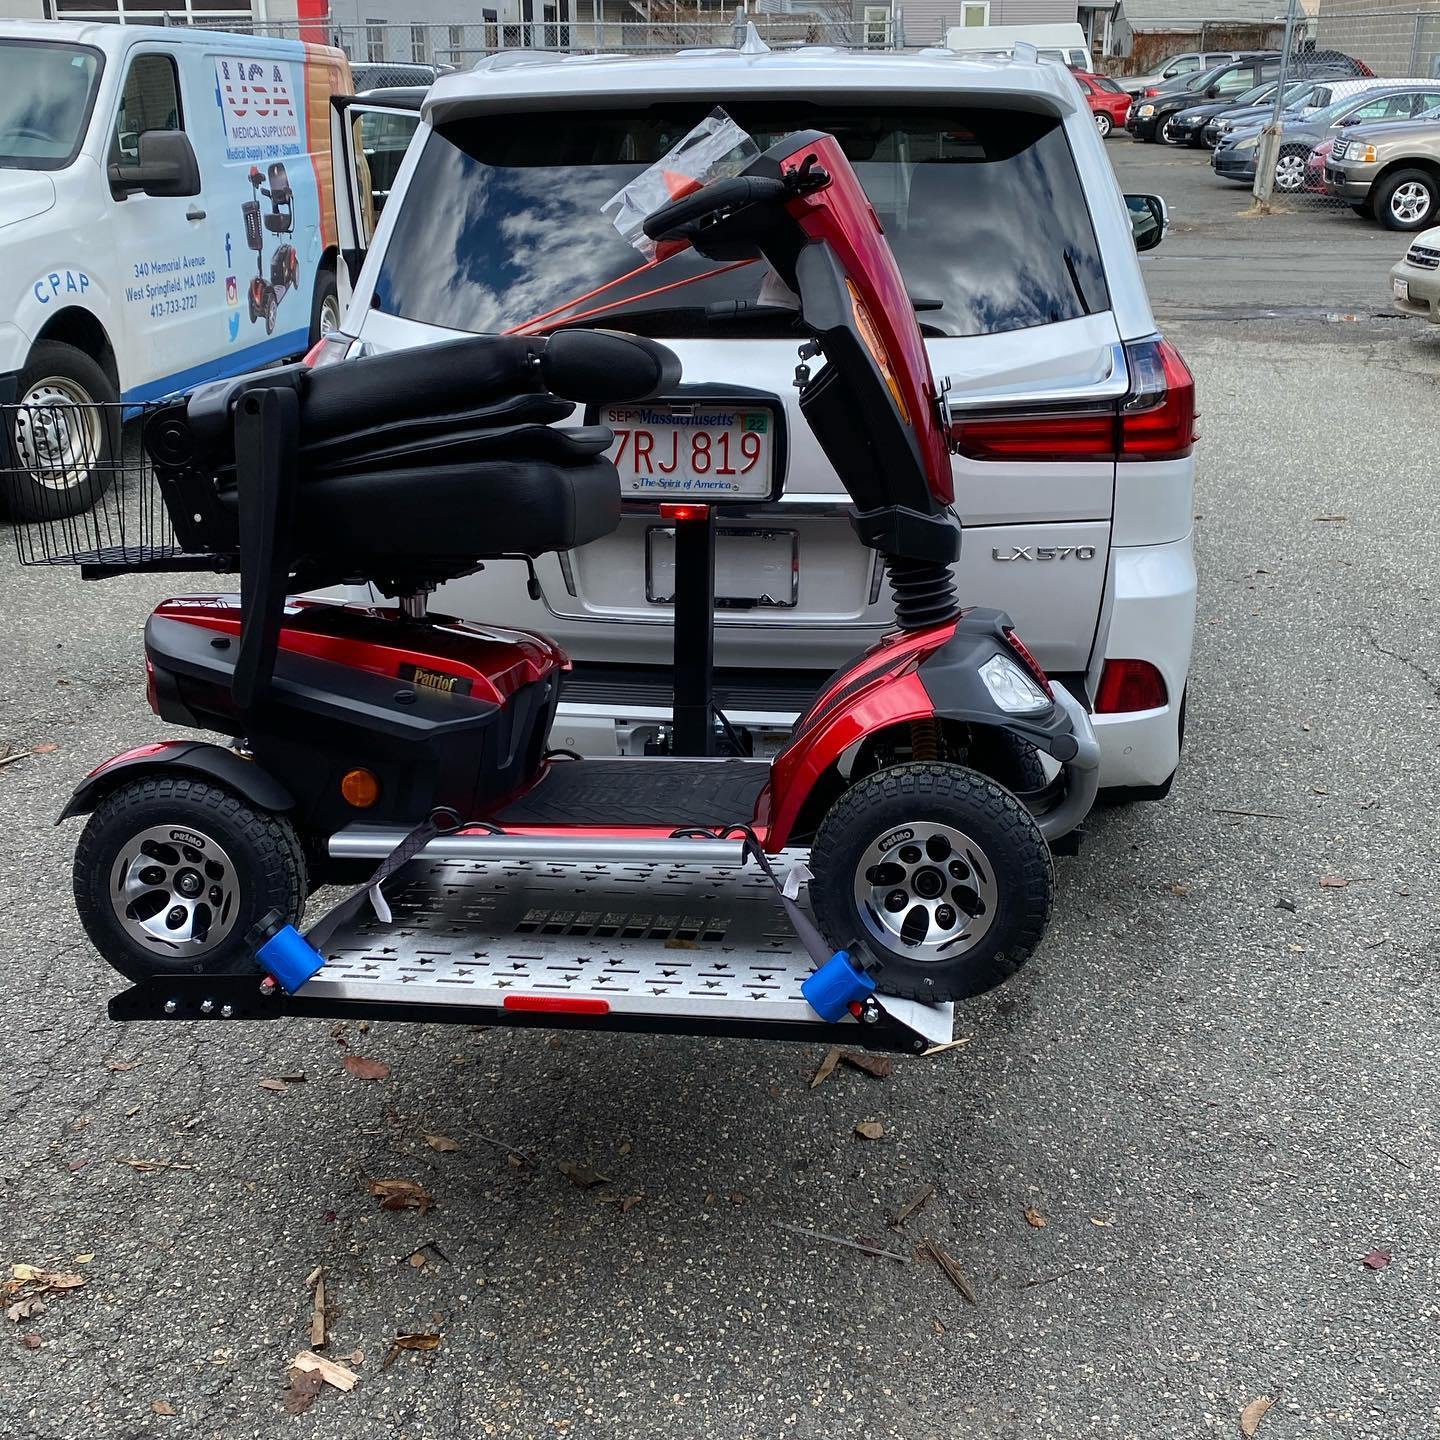 Golden Patriot Heavy Duty Scooter Just Purchased at USA Medical Supply for Vehicle Lift - USA Medical Supply